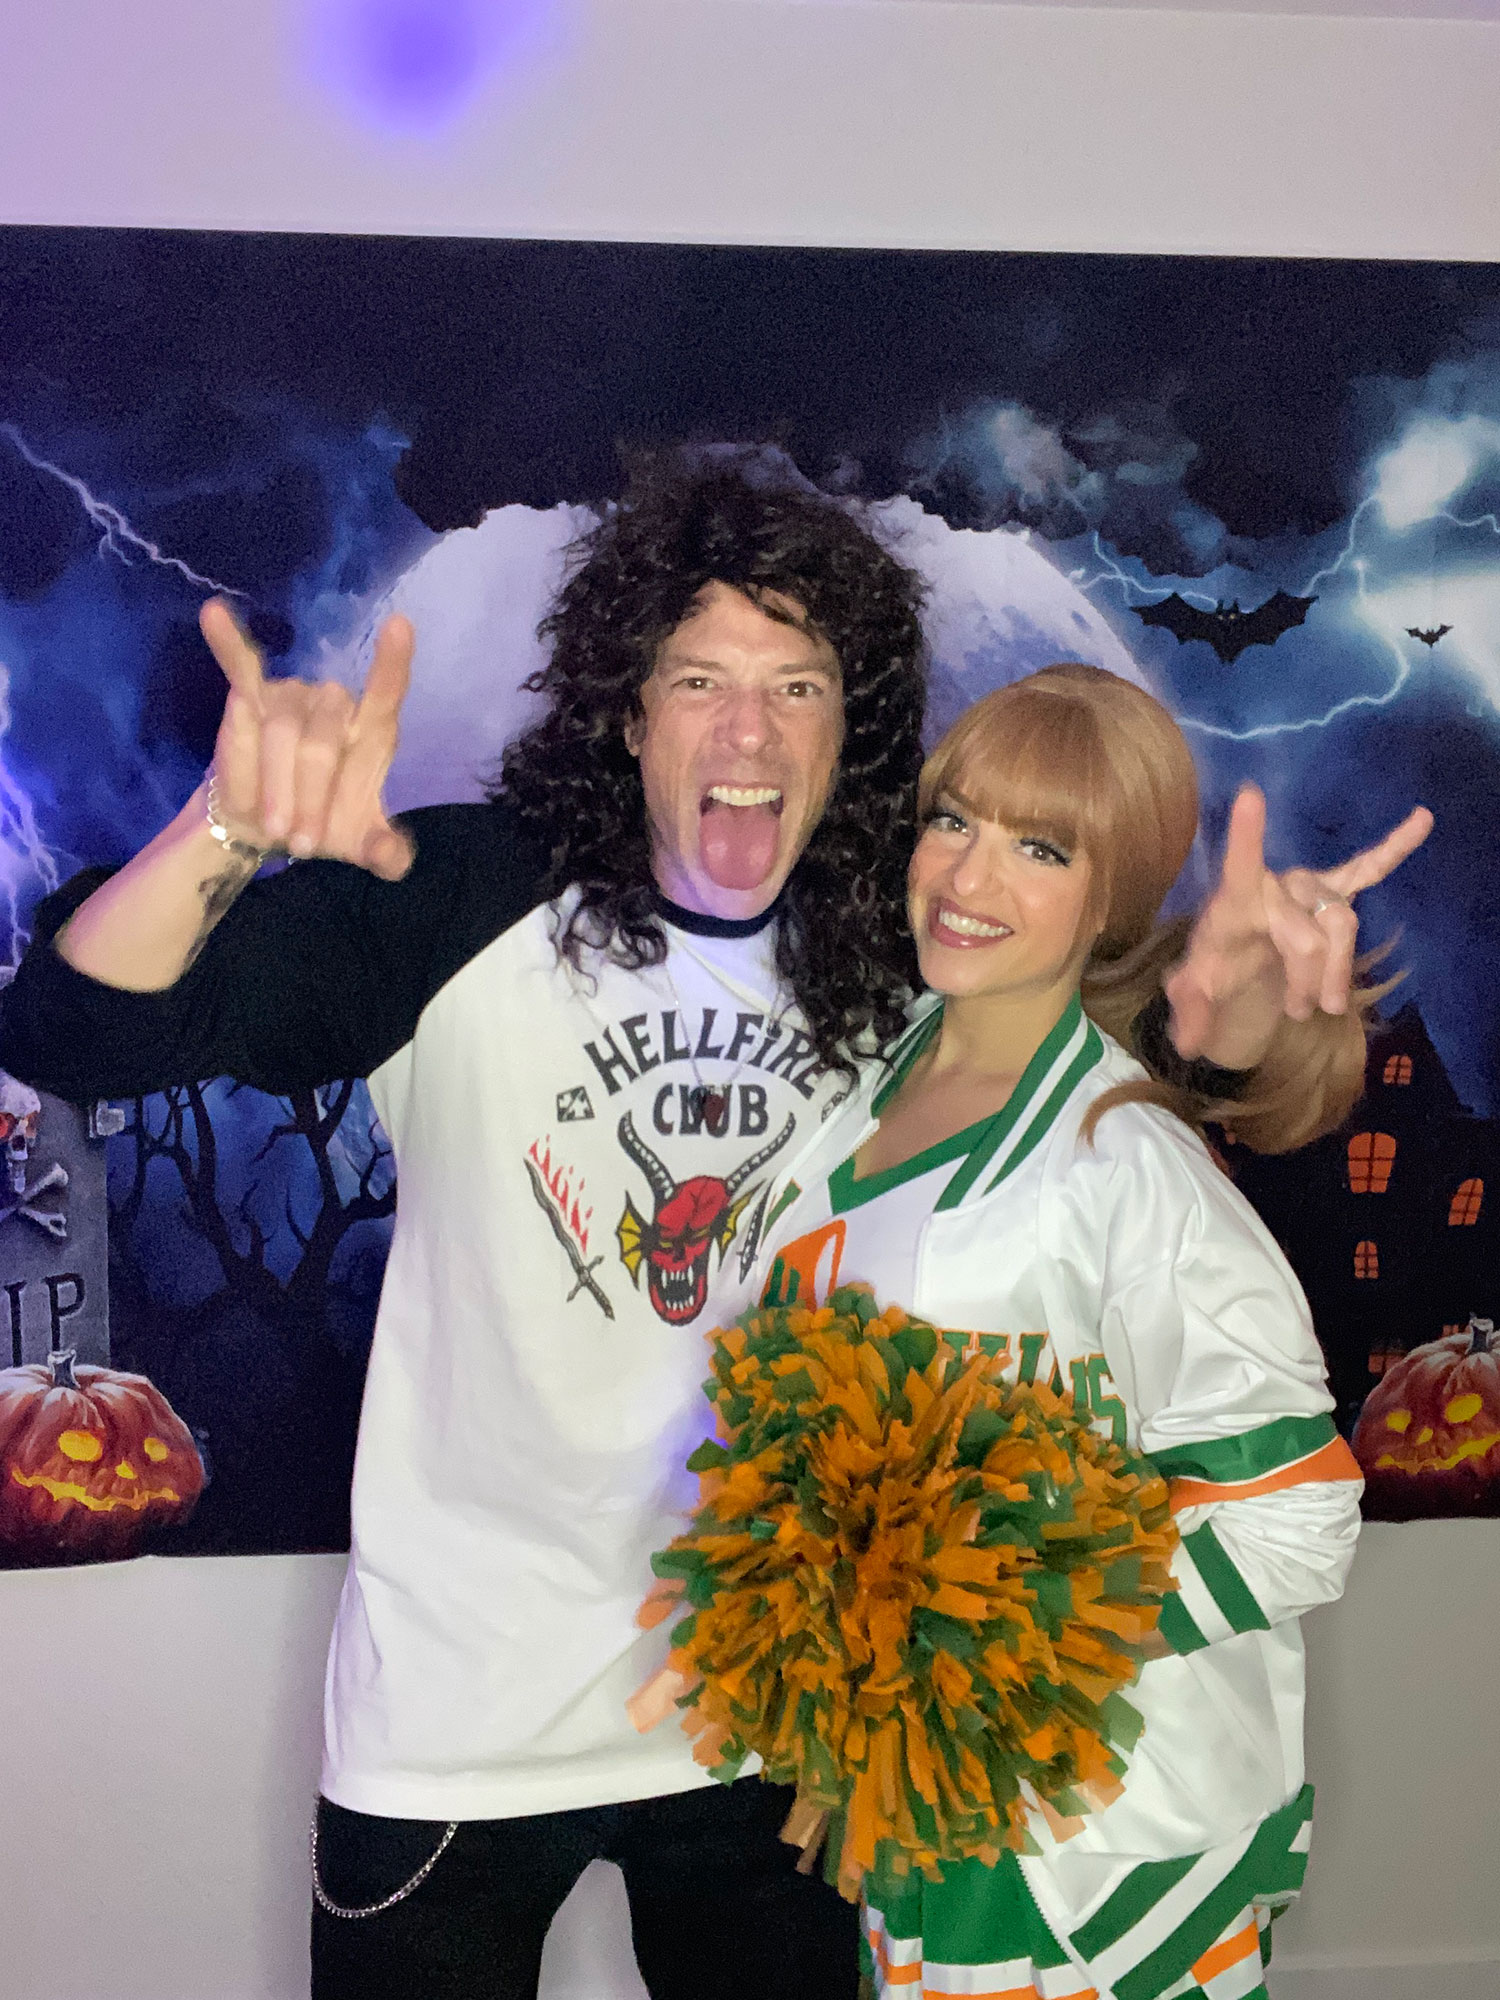 Happy Halloween!! Here's some Eddie and Chrissy from stranger